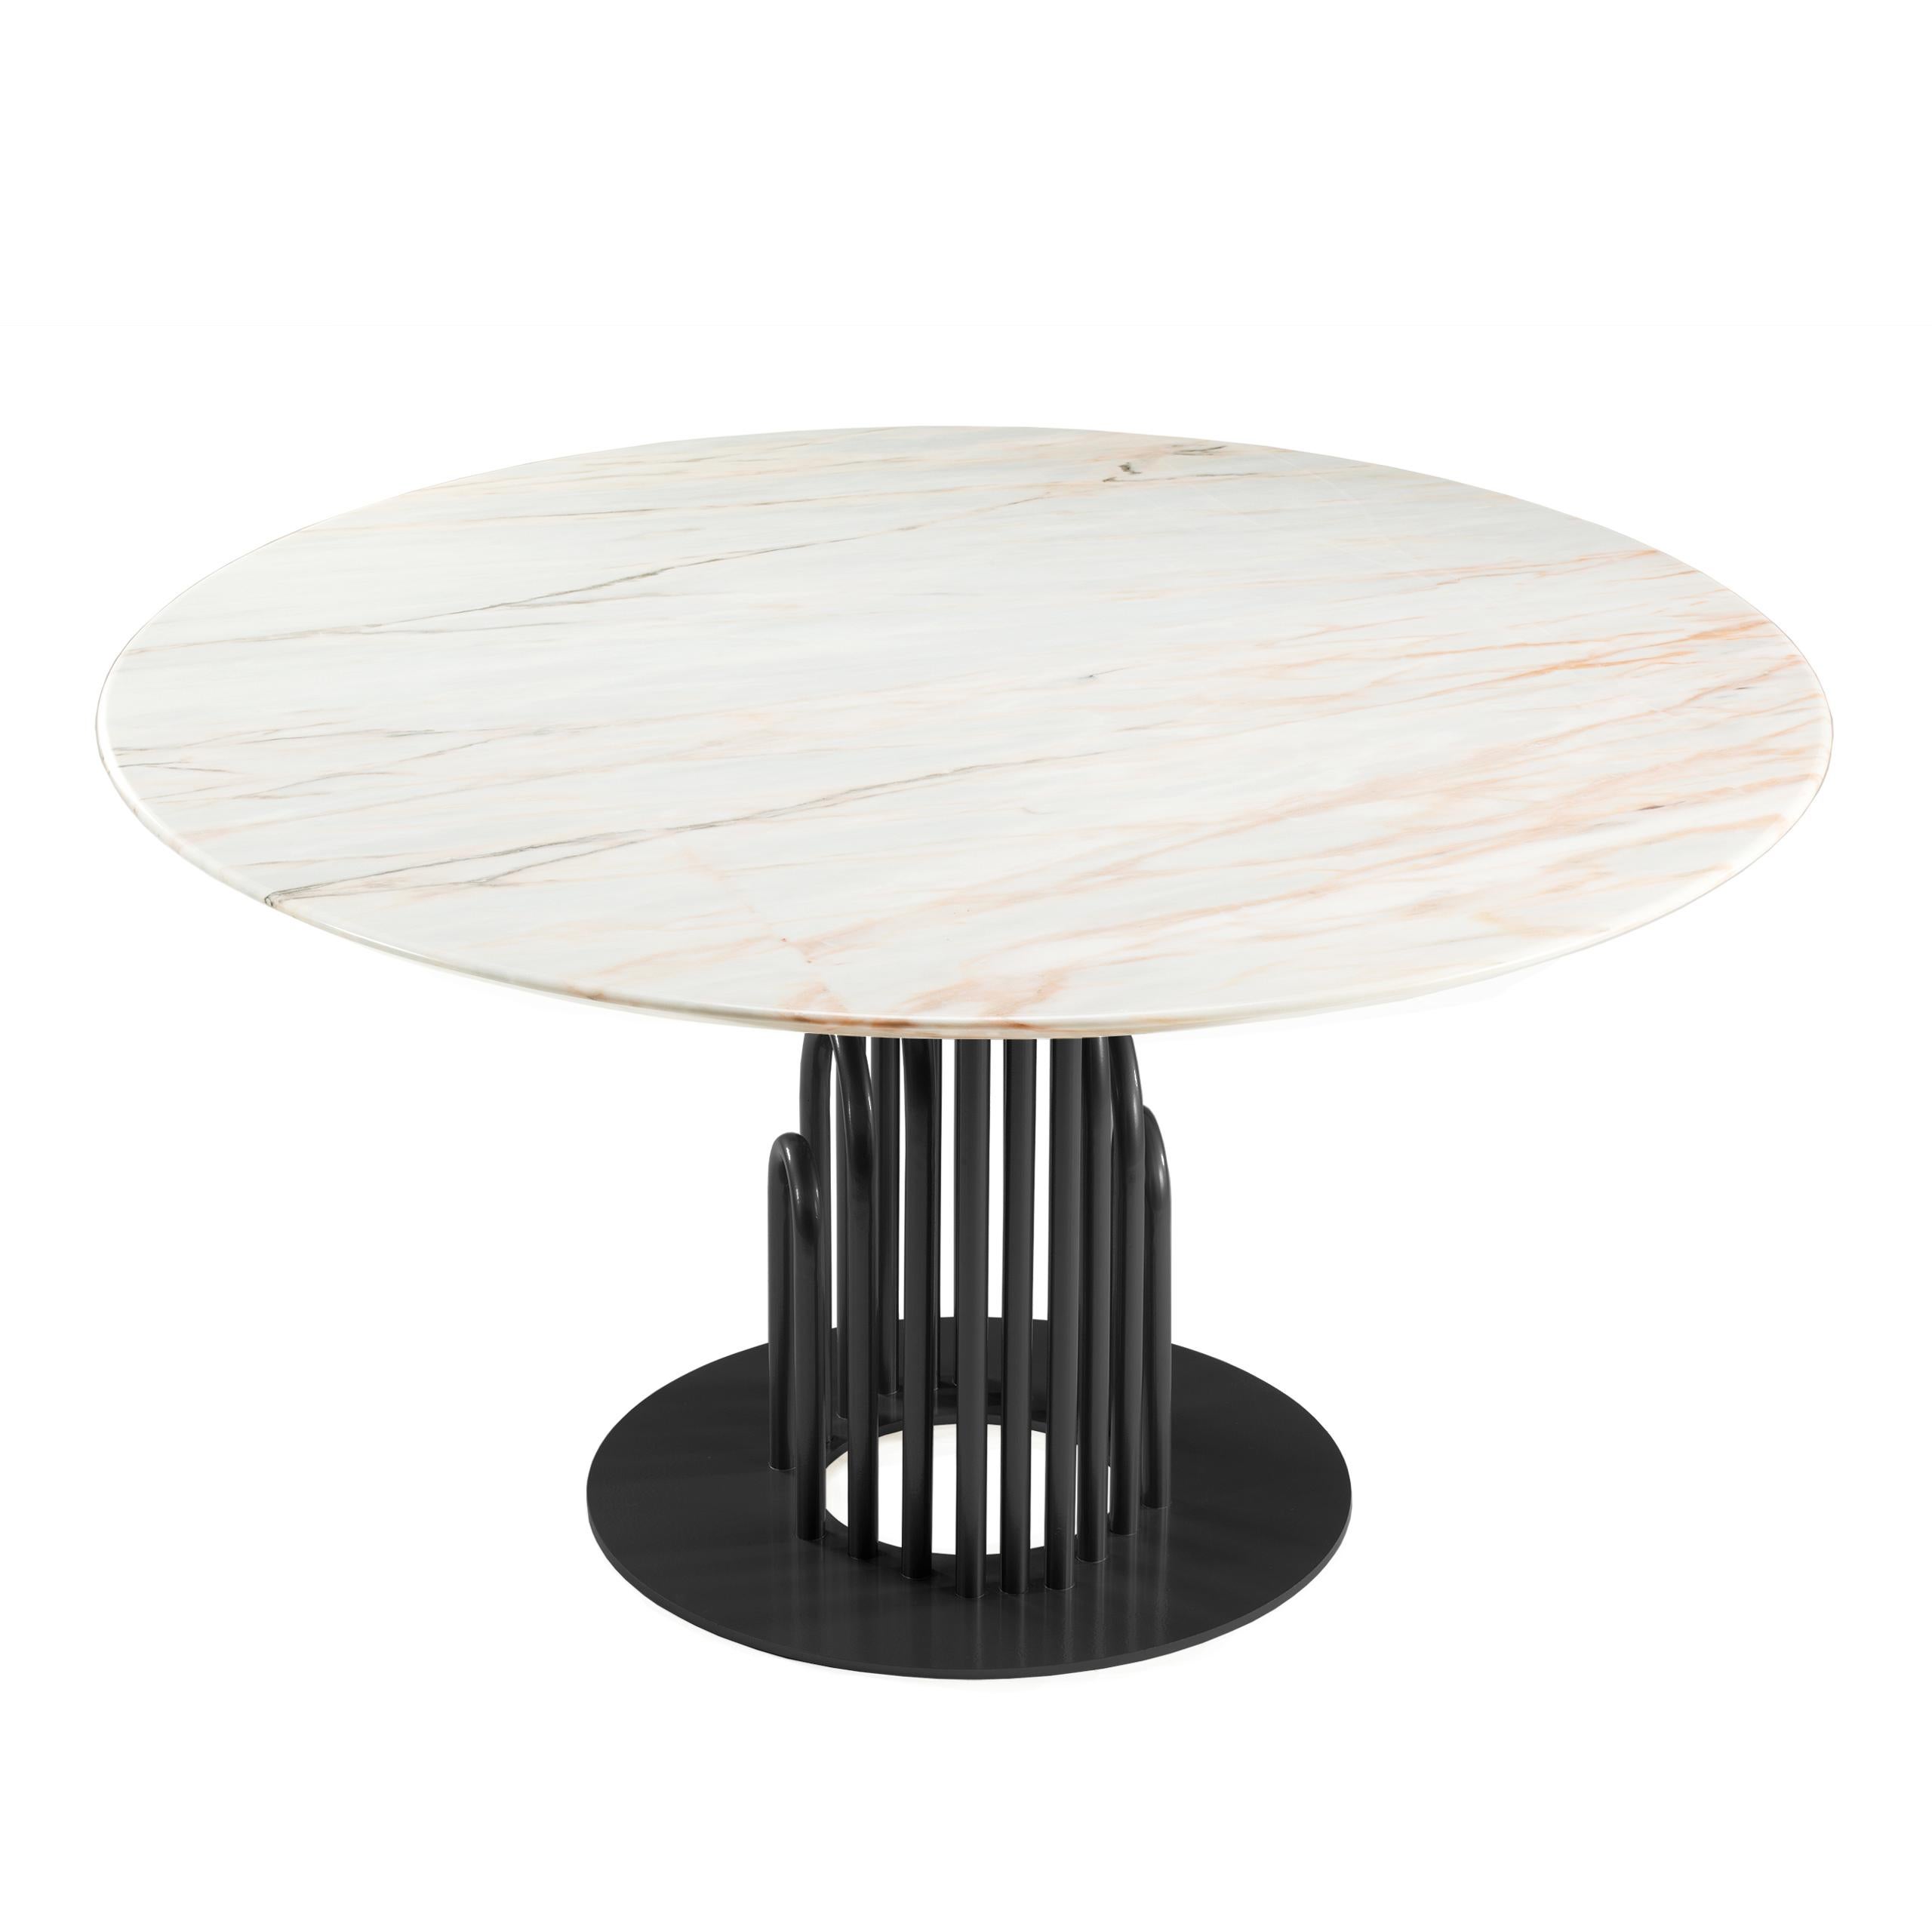 Bara Dinner Table:
120cm Diameter Top in Estremoz White Marble
Gold Lacquered Metal Base
Made to Order

For sales with delivery address within European territories, VAT will be charged additionally to the stated price.